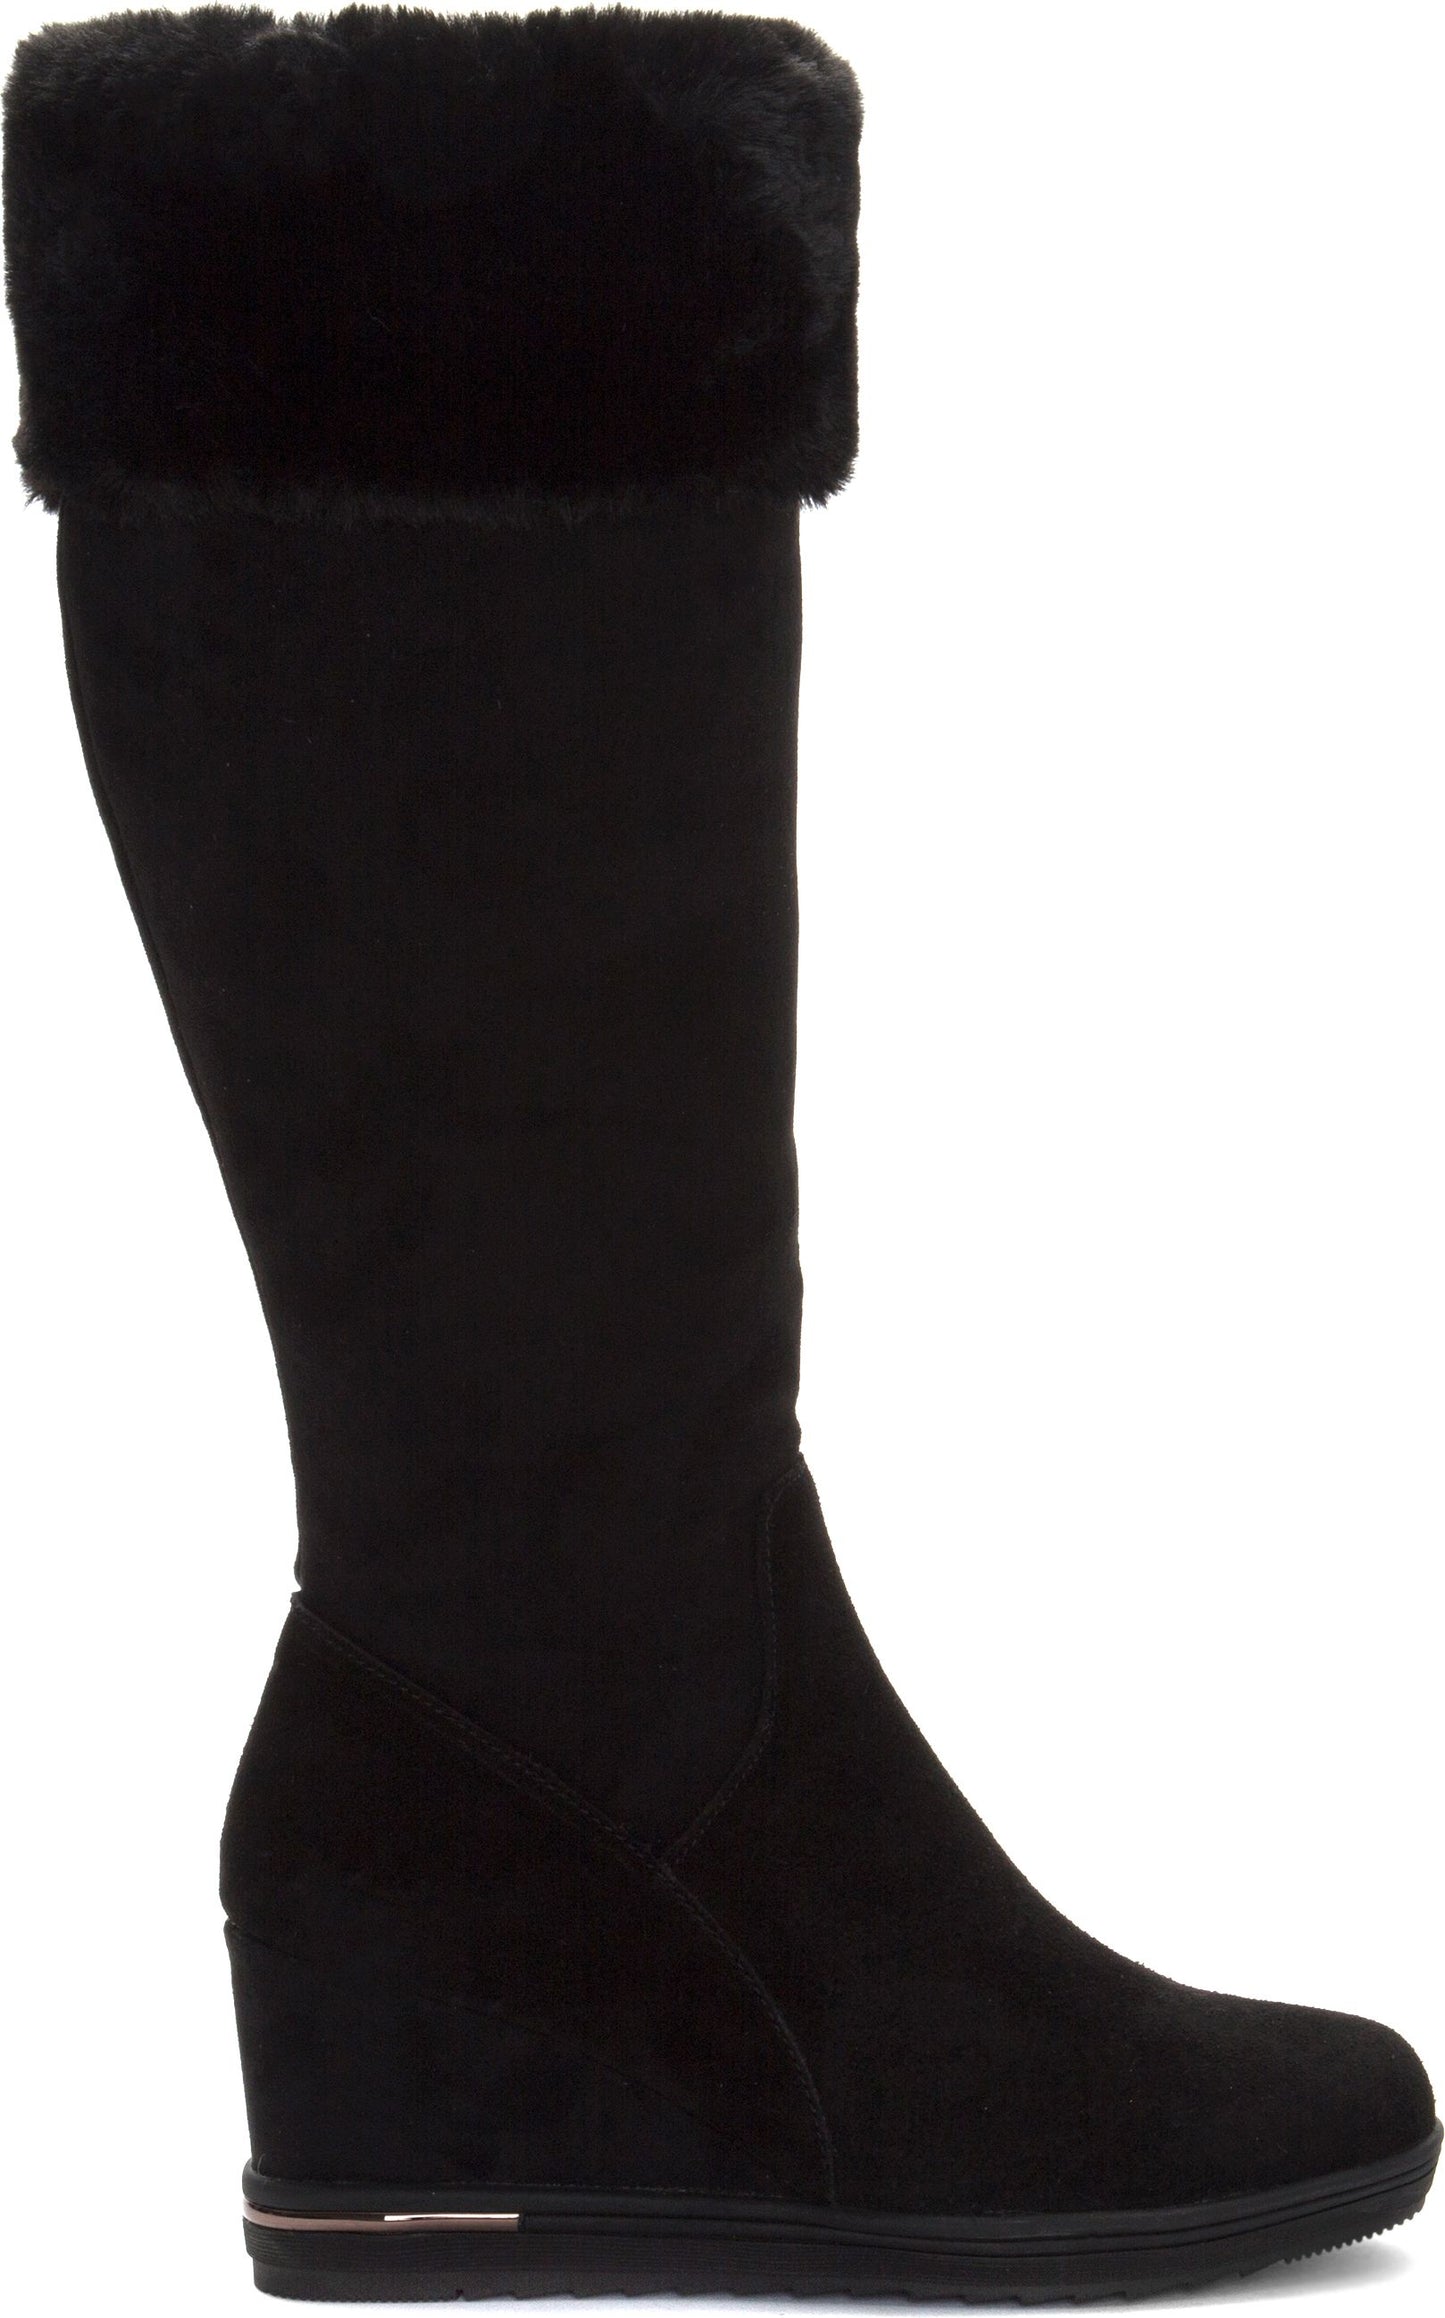 Religious Comfort Boots Cherry On Top Black Suede